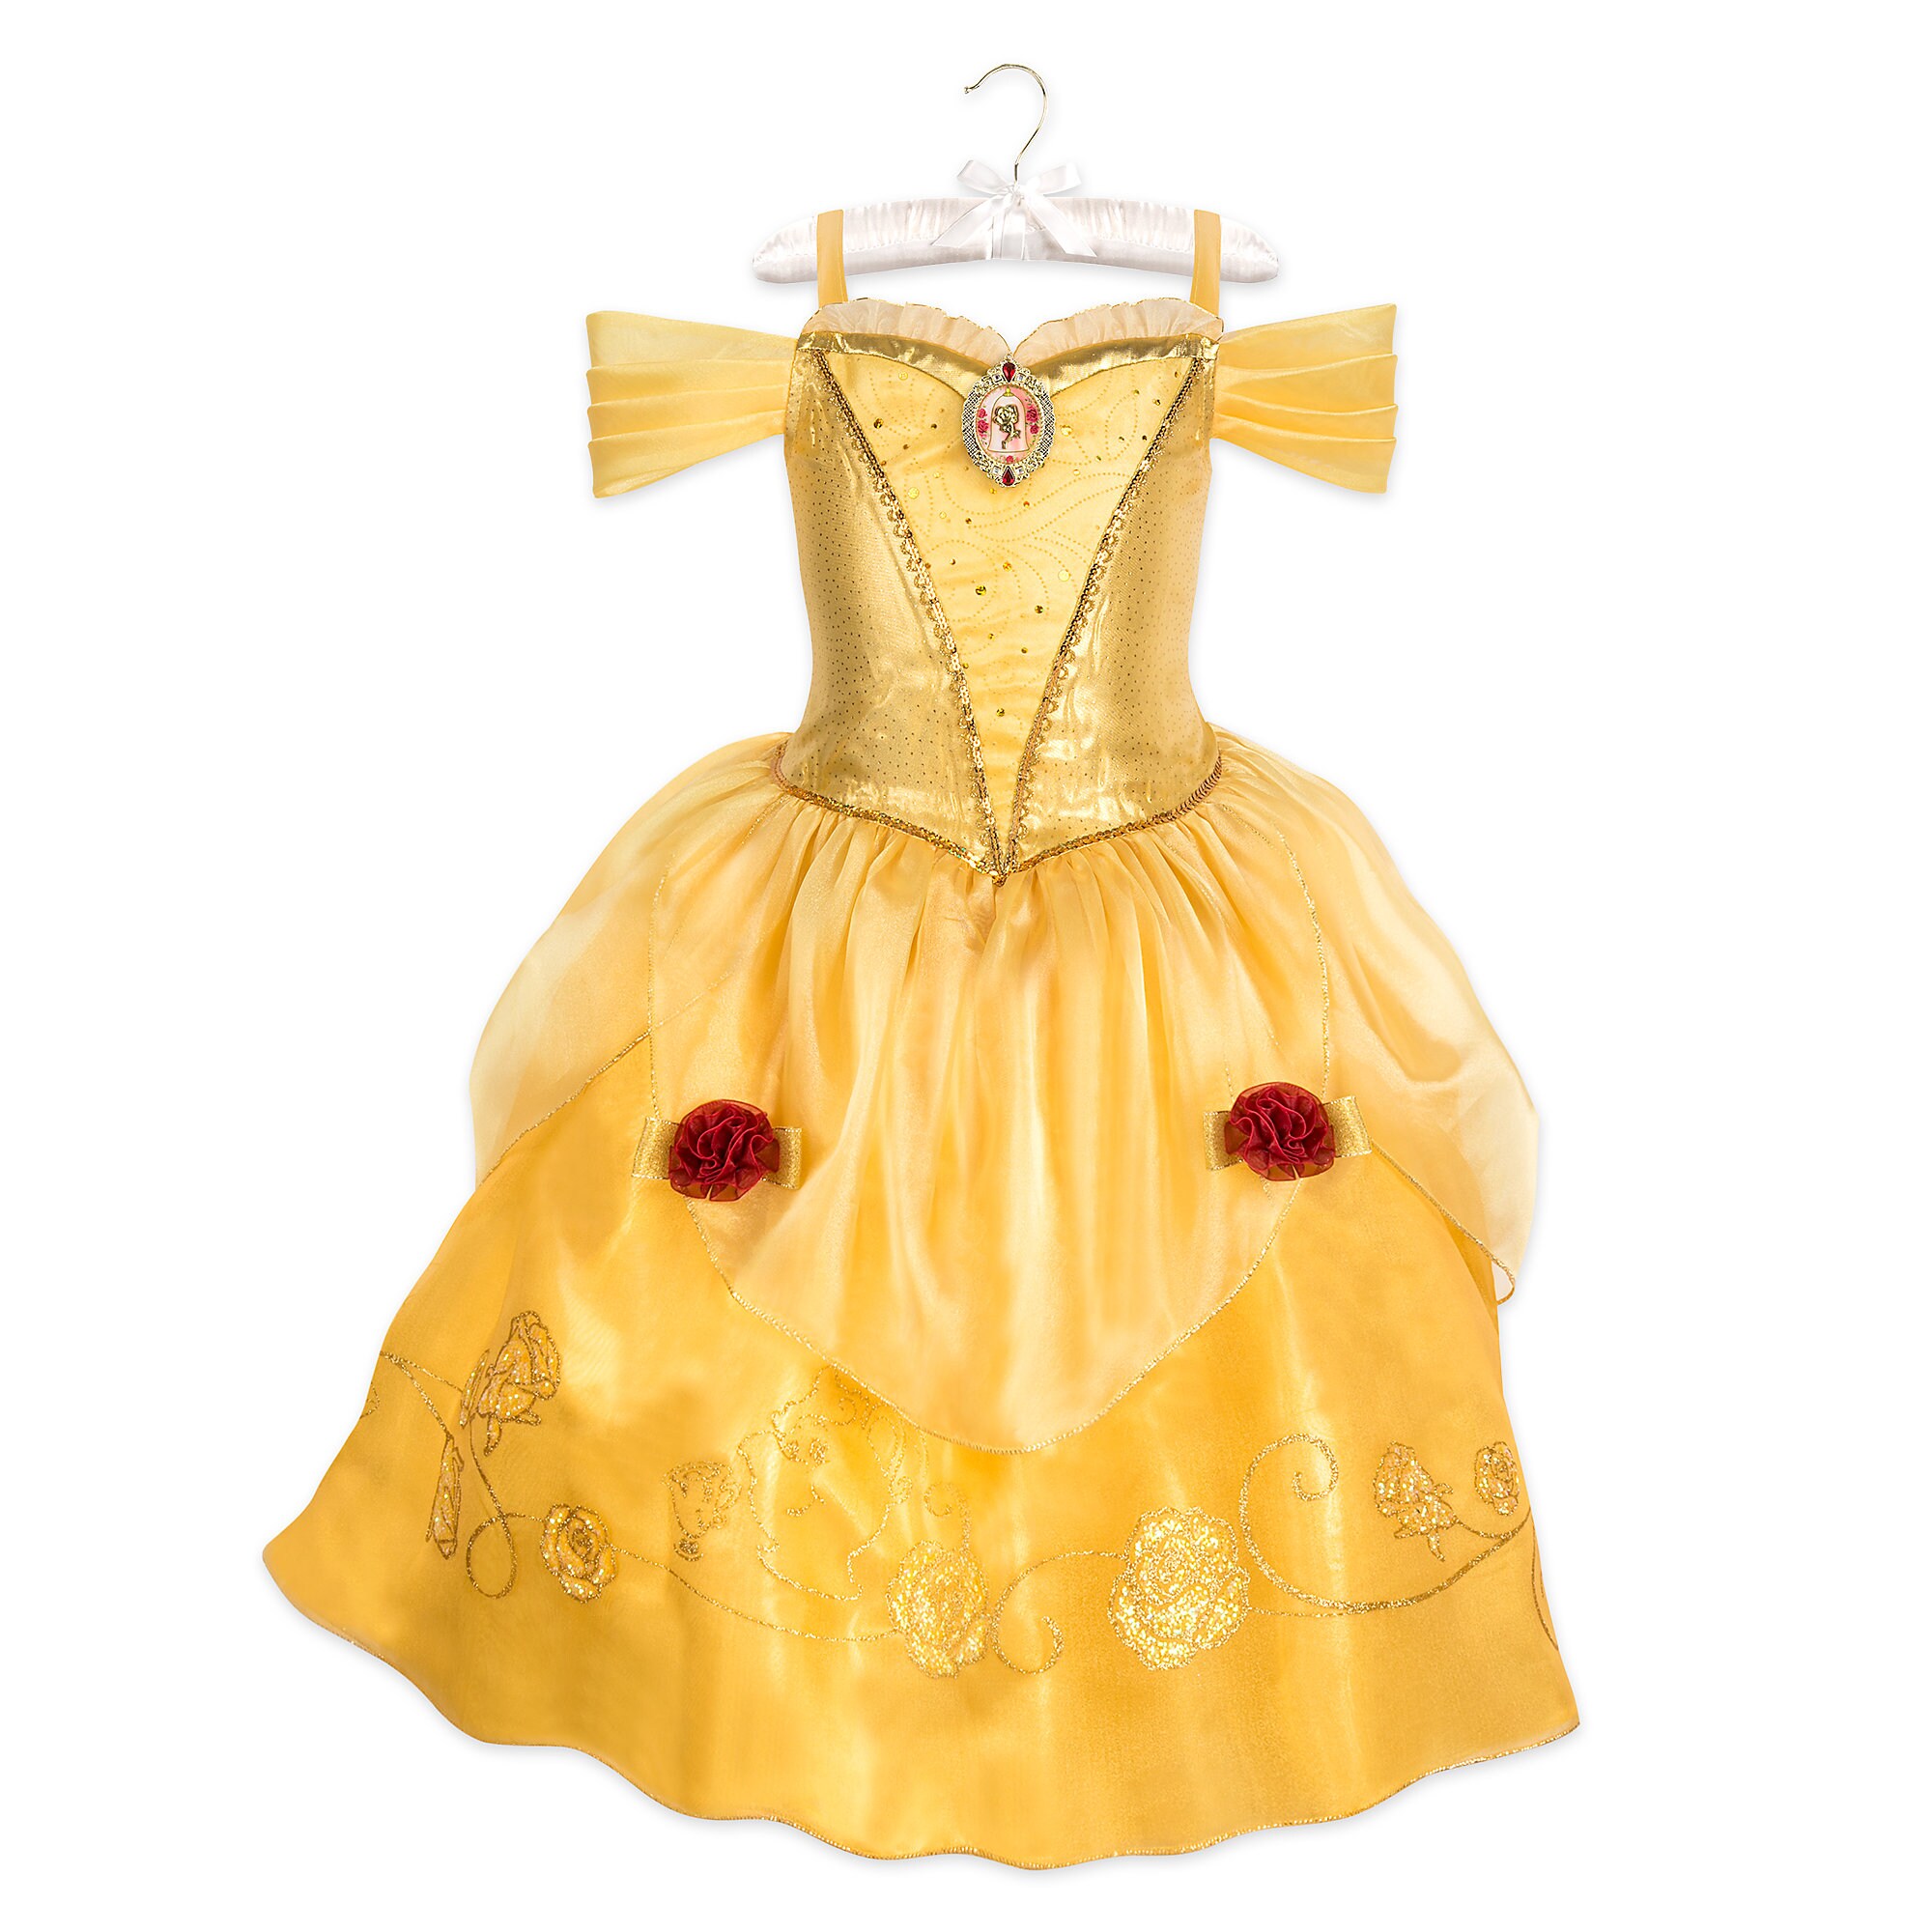 Belle Costume for Kids - Beauty and the Beast now out for purchase ...